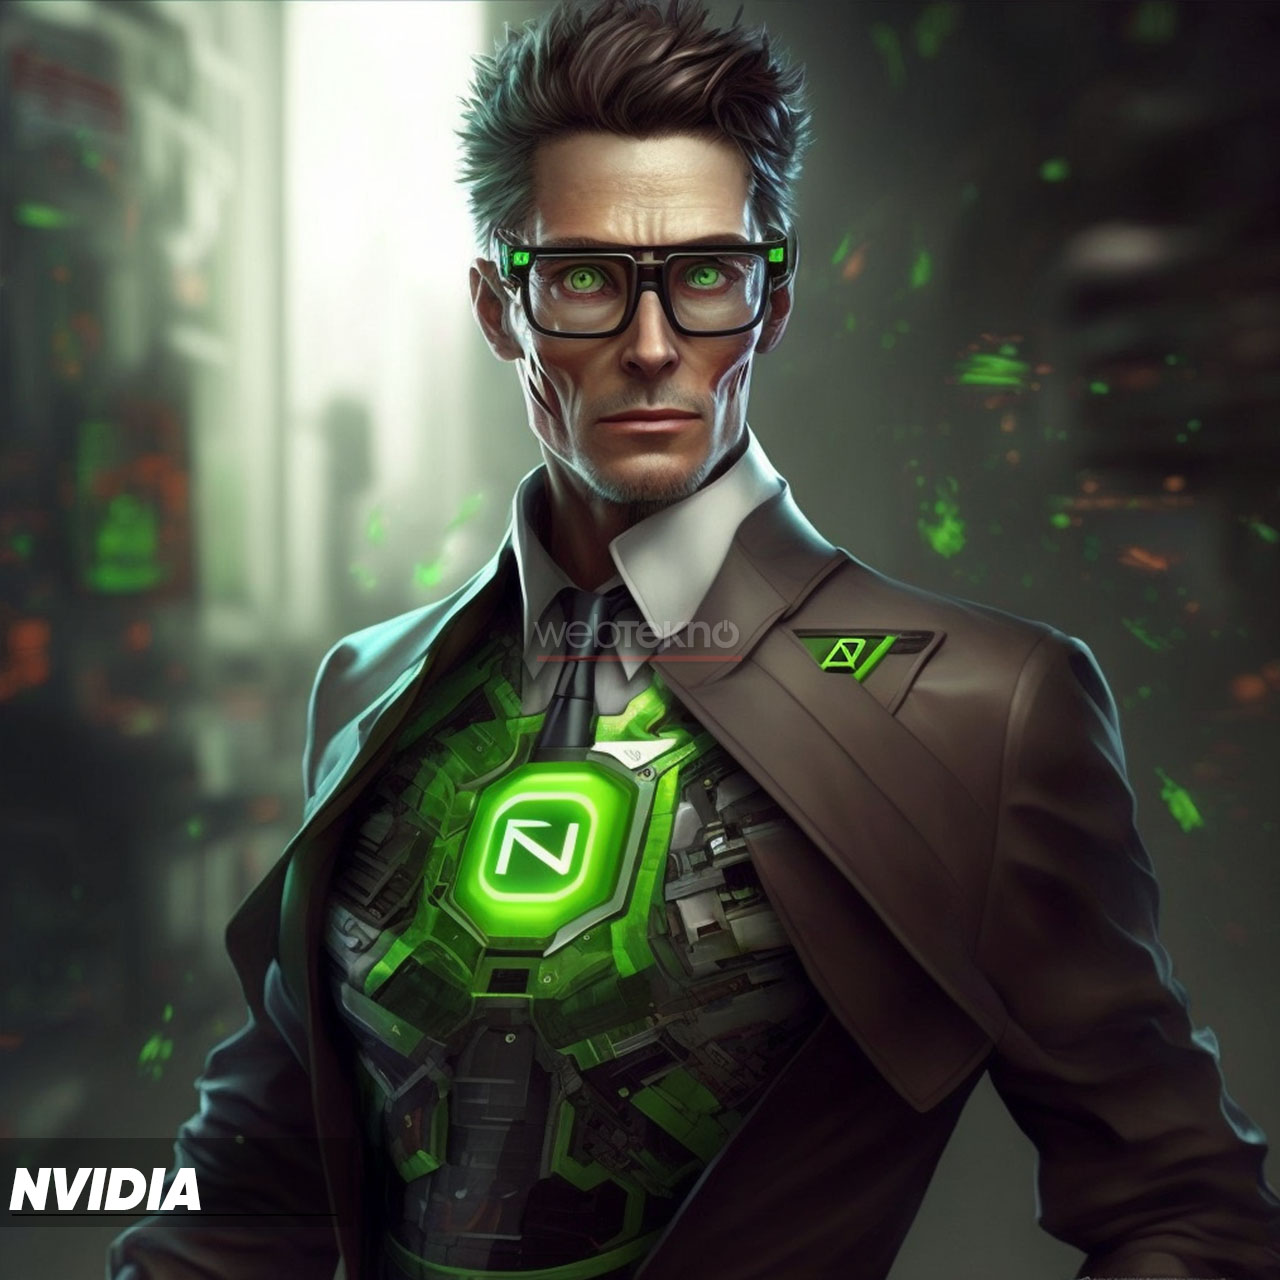 What if Nvidia were human?